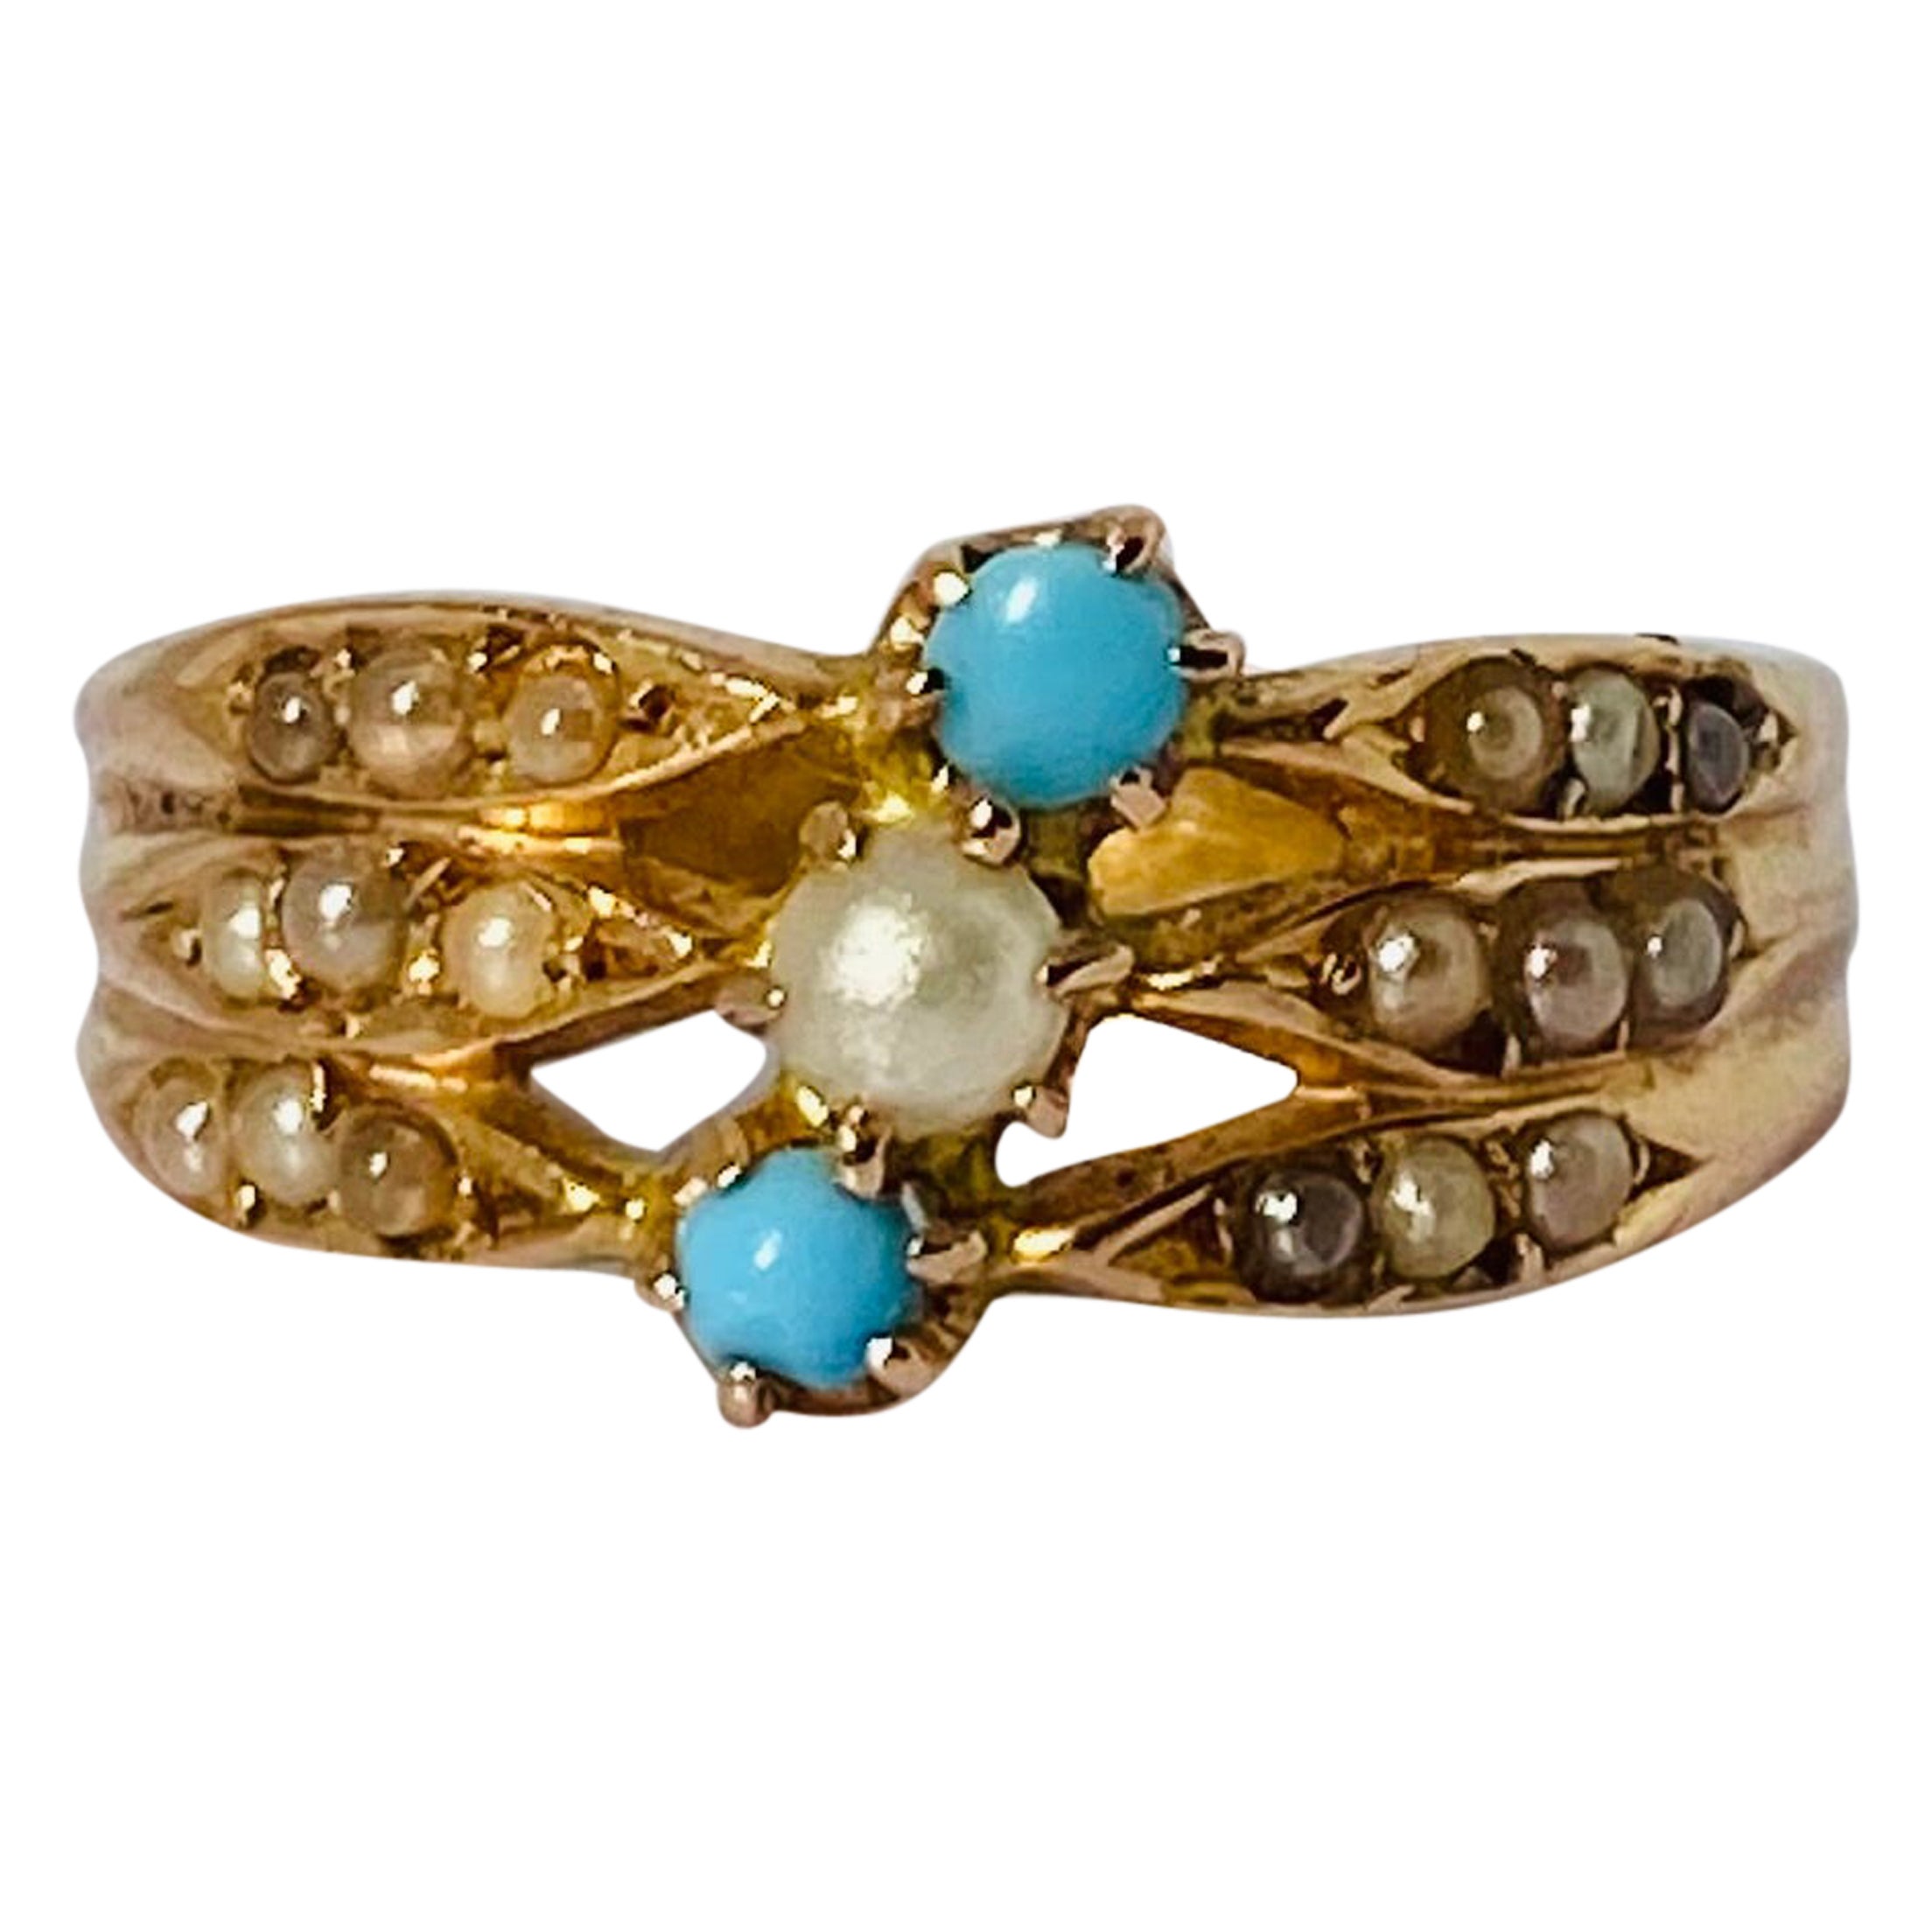 Antique ring with turquoise & seed pearls from 1890, 18 carat gold